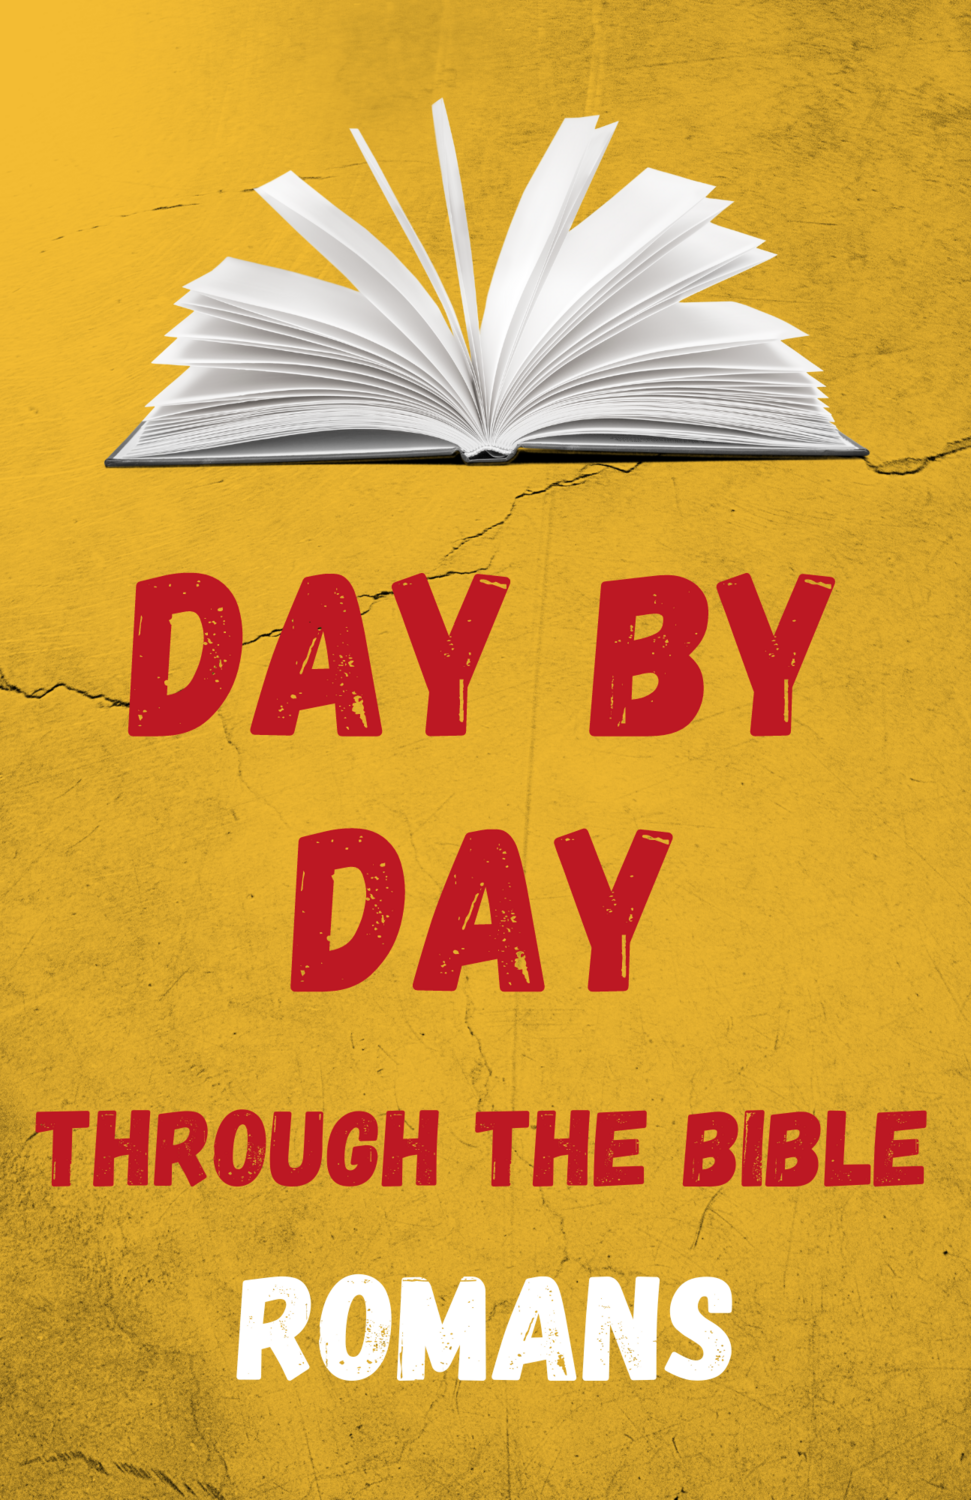 Day by Day Through the Bible: Sixteen Days in Romans - Digital Download